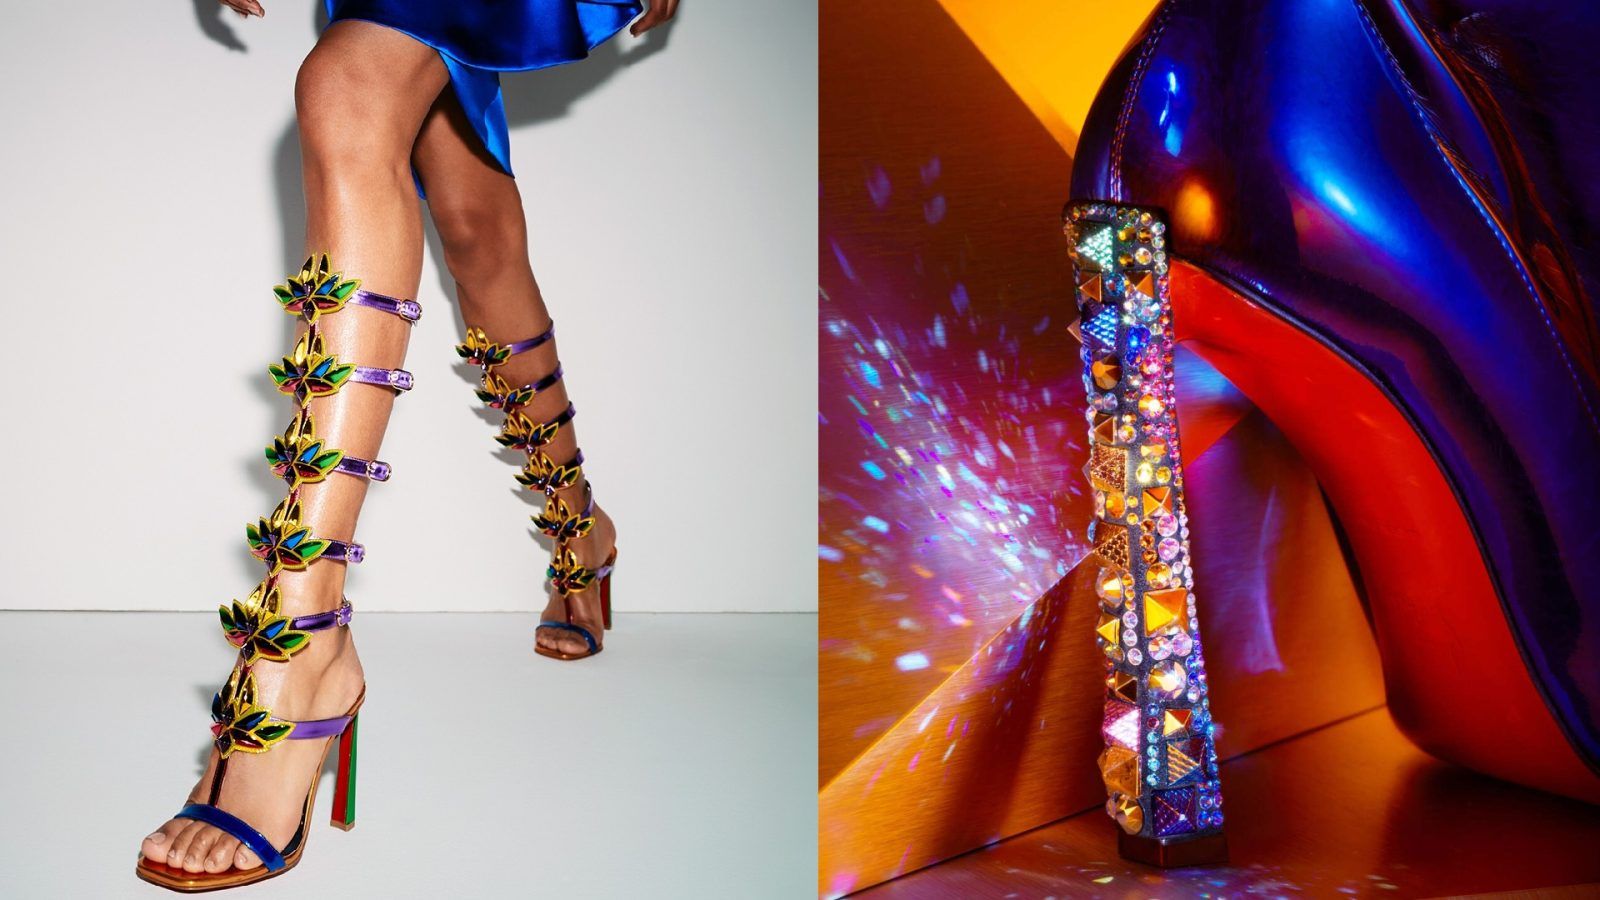 Christian Louboutin and Marvel introduce limited edition capsule collection